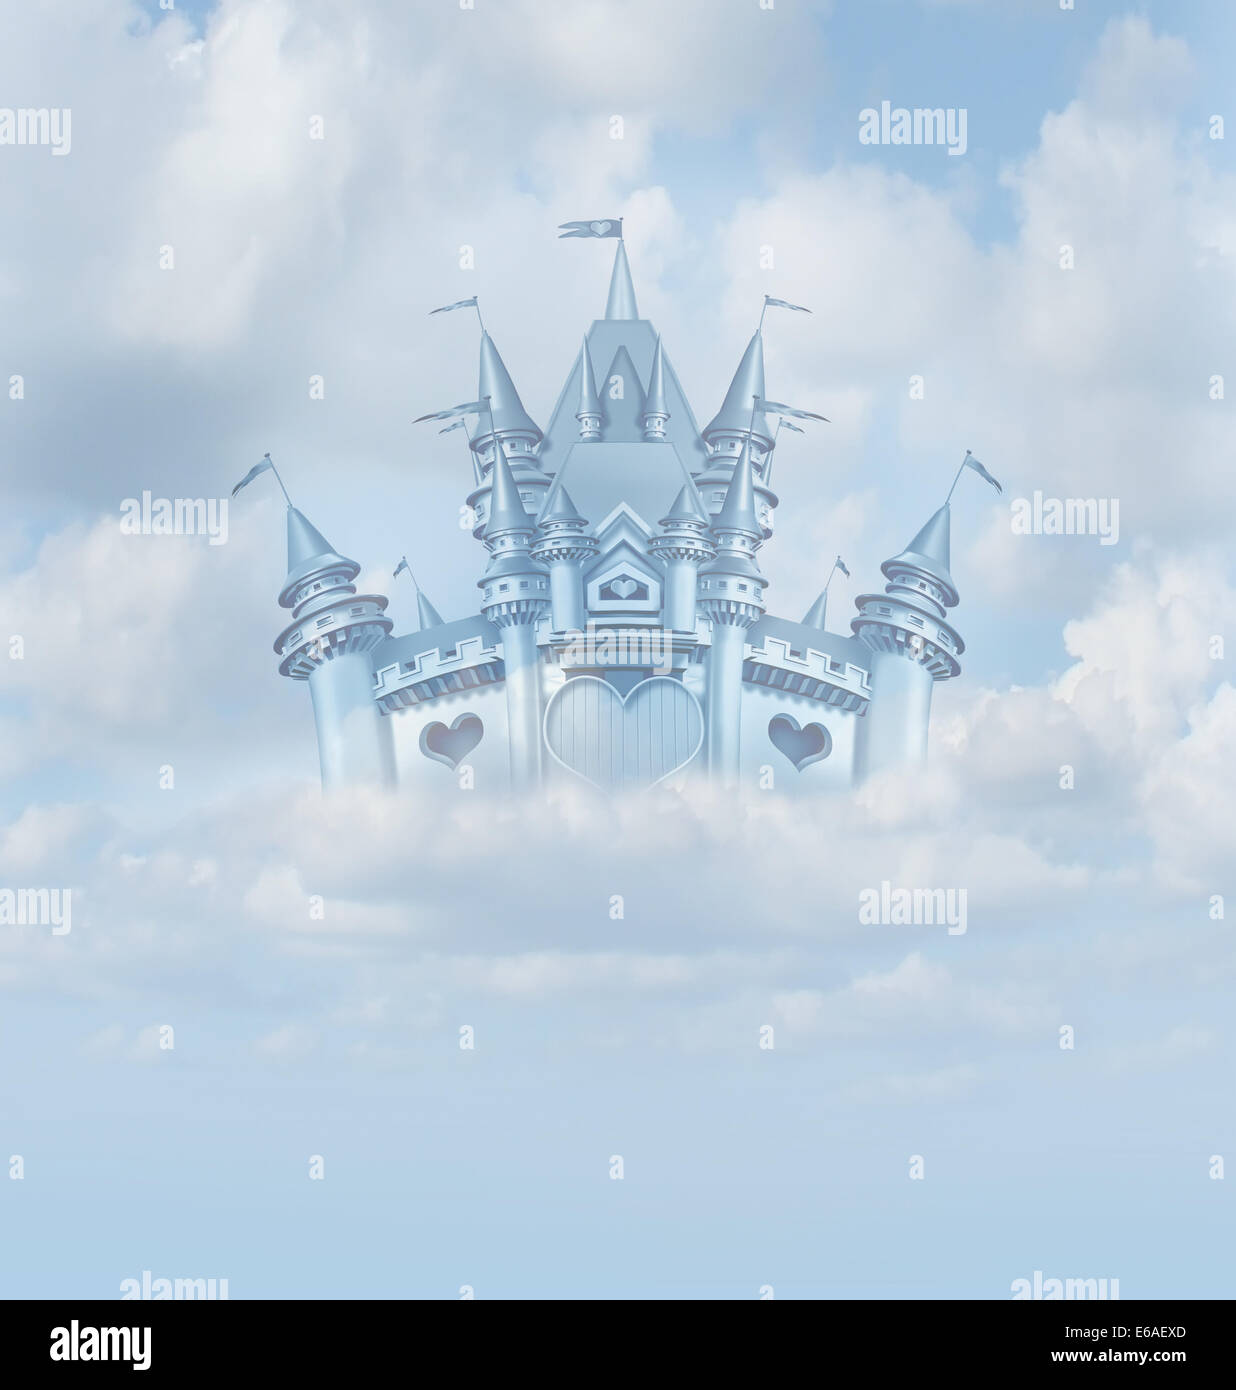 Magical fairytale castle floating in the clouds as a fictional fortress of love in the sky home to royalty as the prince and princess. Stock Photo